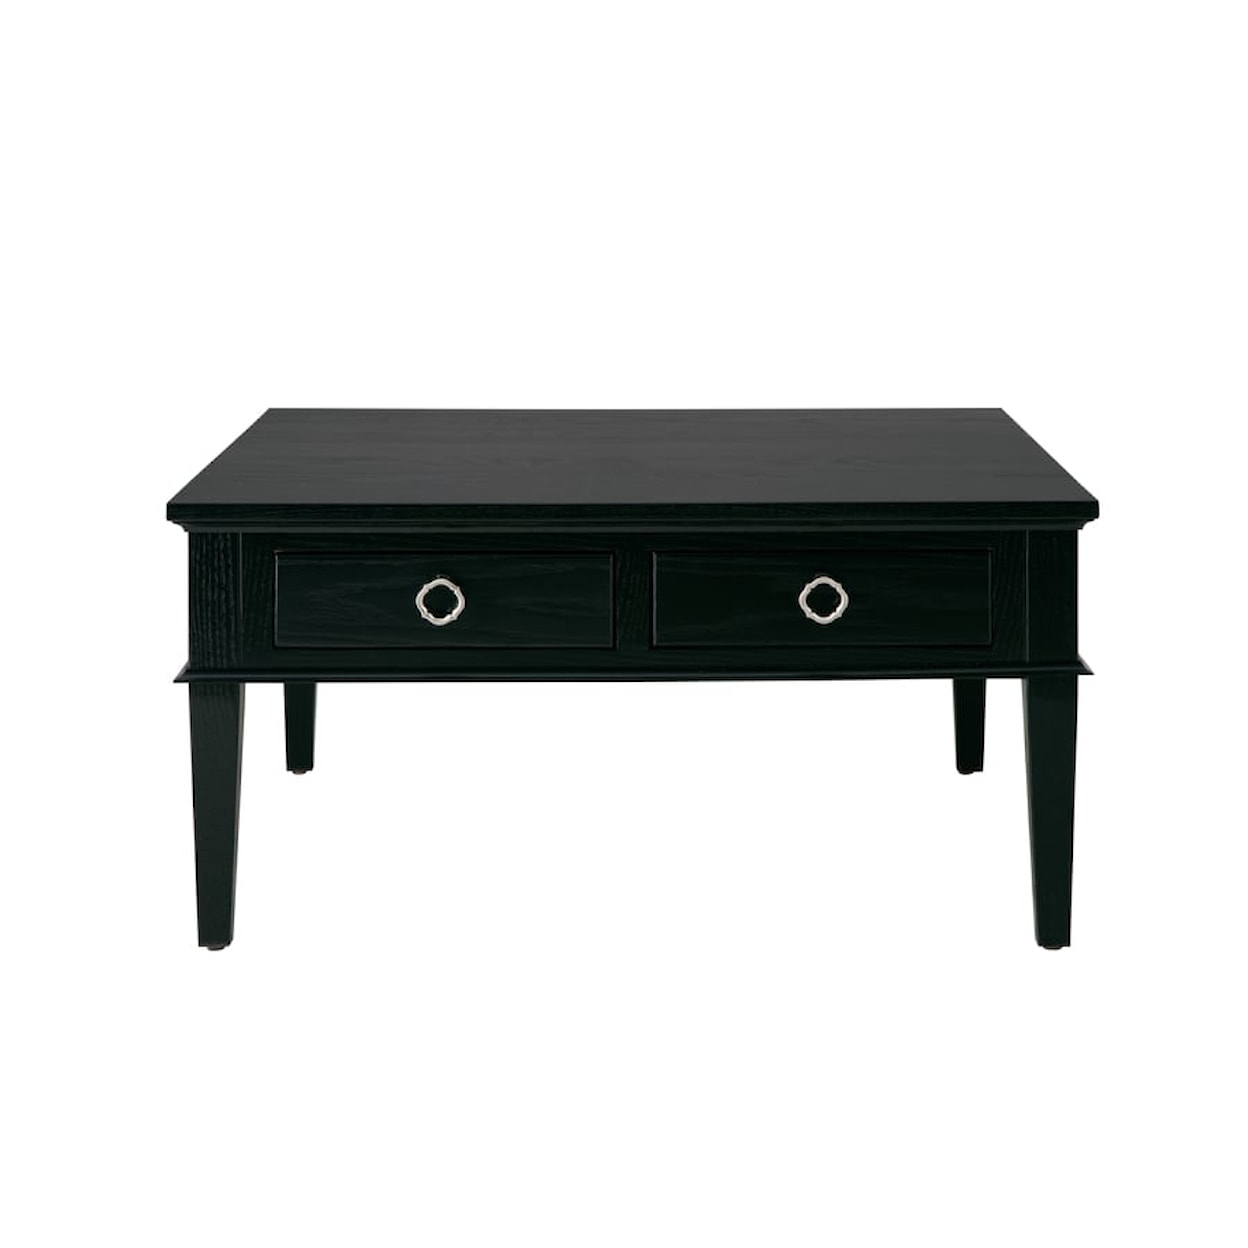 Mavin South Port Occasional Customizable South Port Coffee Table